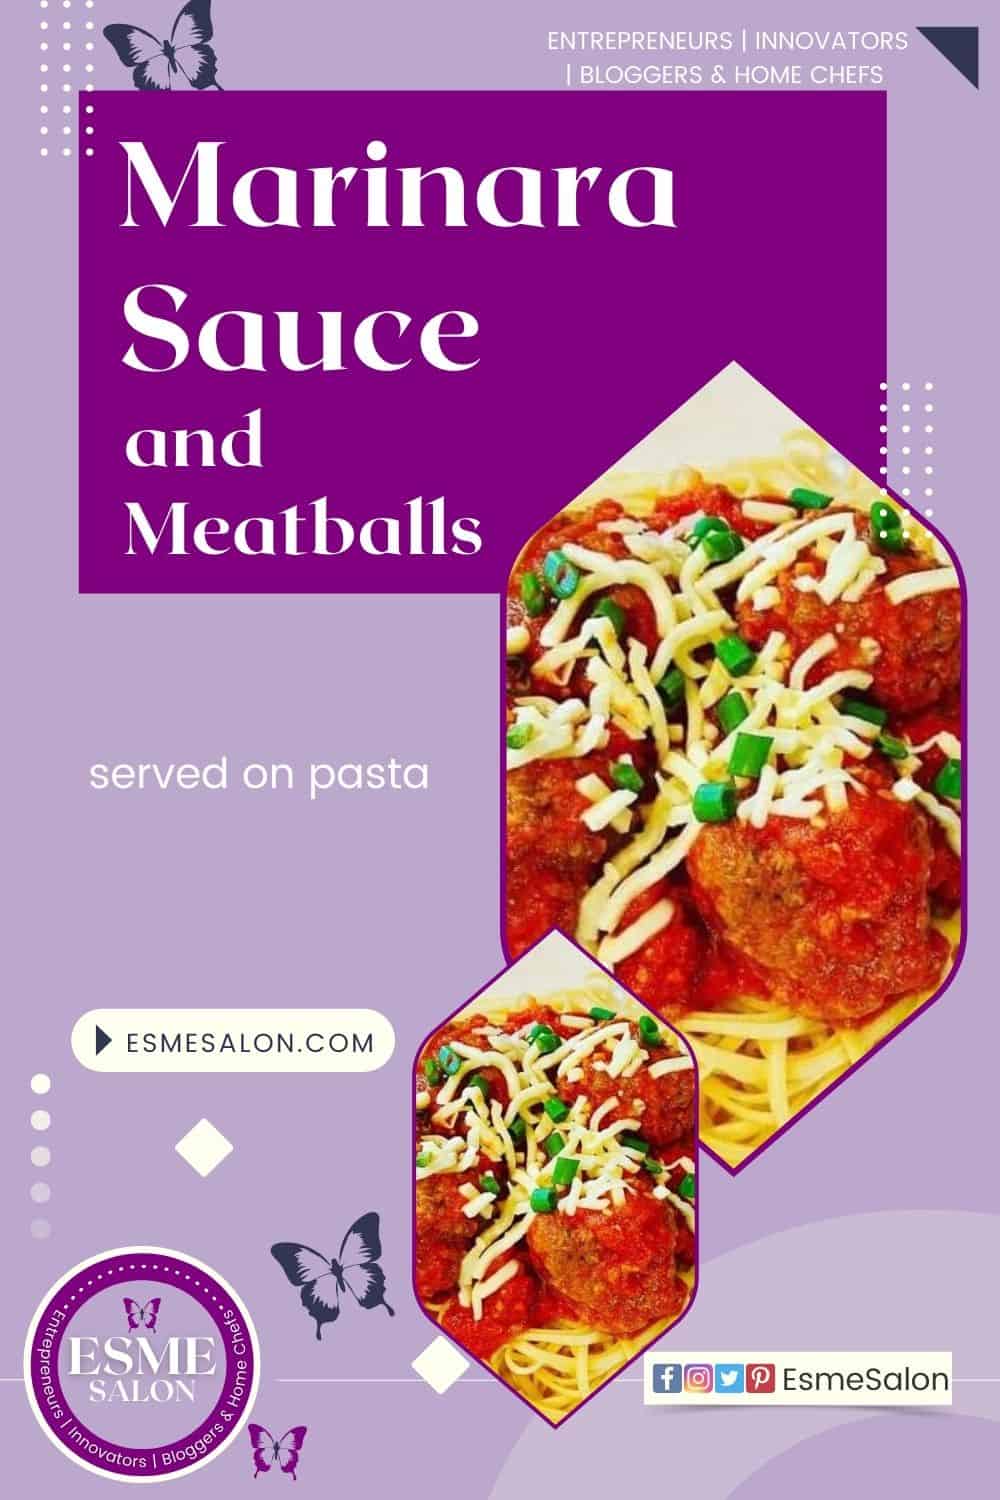 An image of a plate of pasta topped with meatballs and marinara sauce